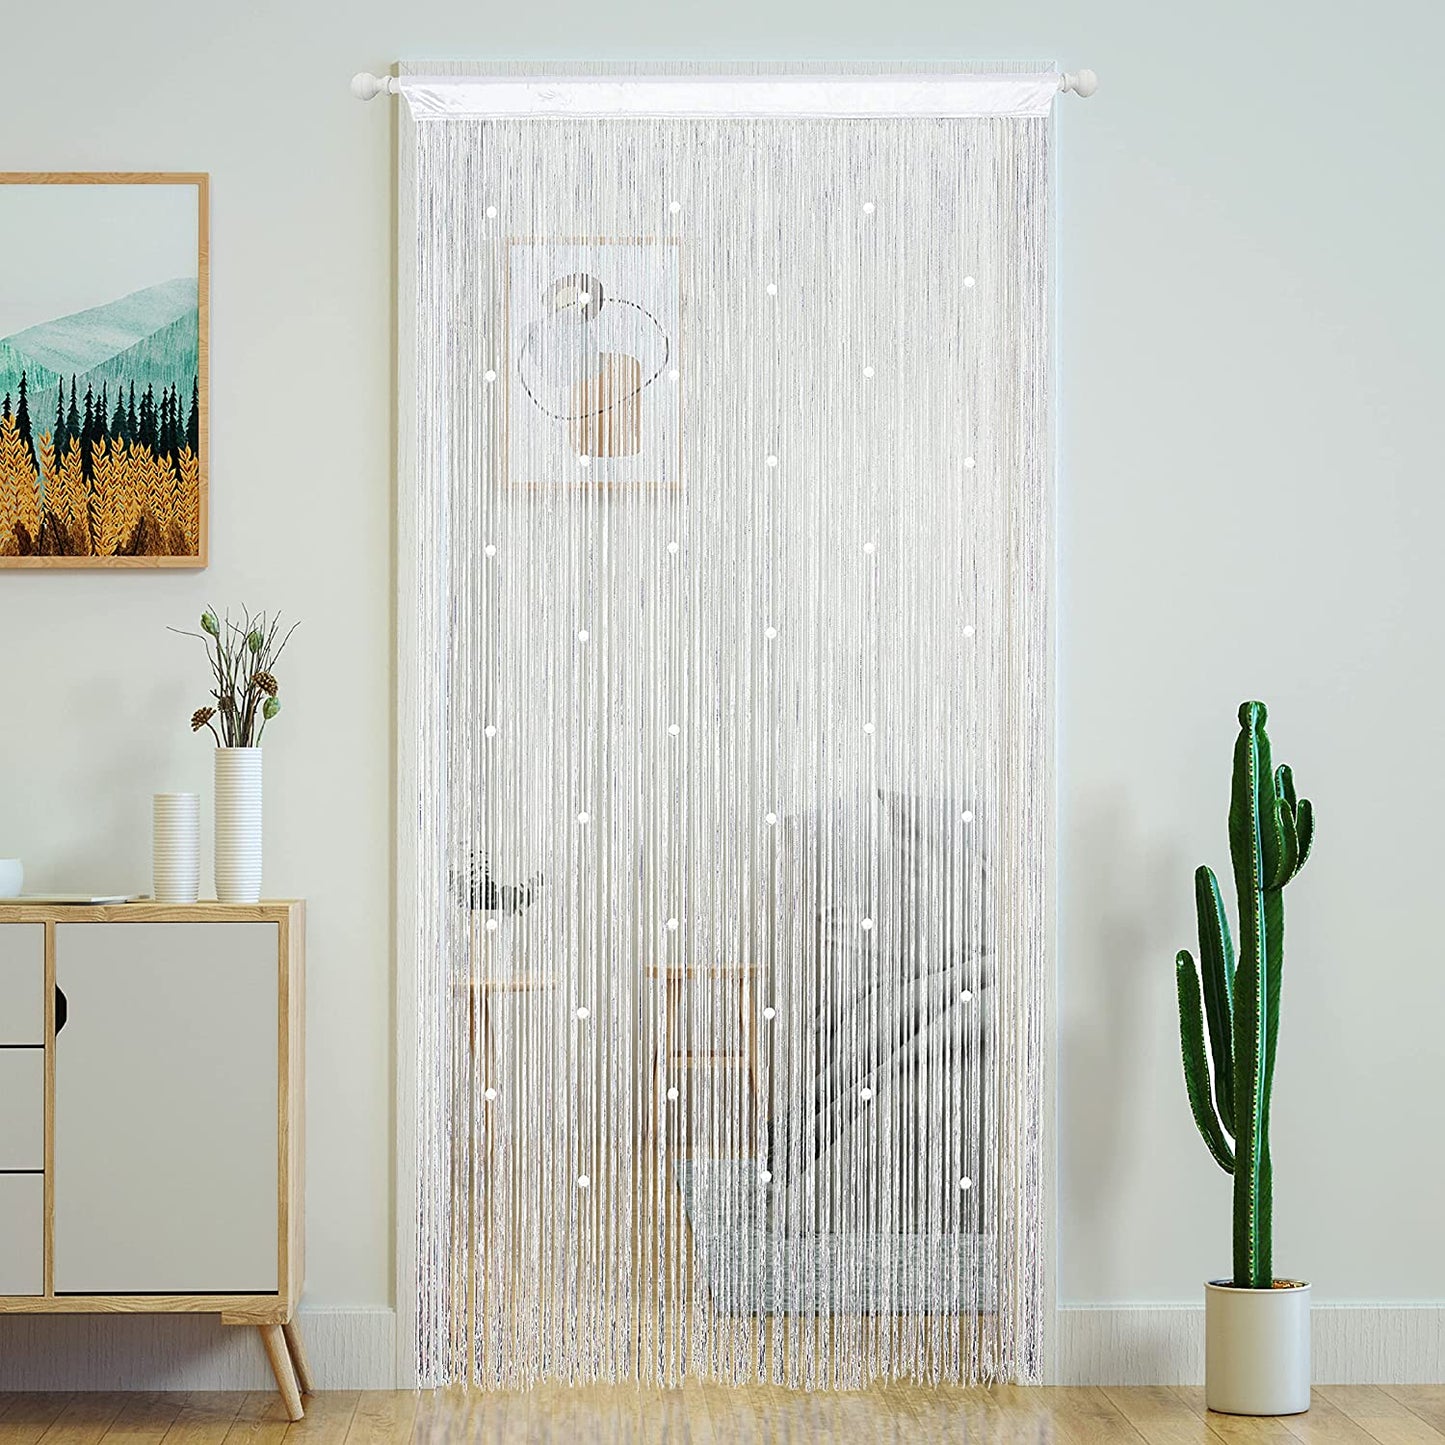 Yaoyue Beaded Curtain Door String Curtains for Doorway Tassels Beads Hanging Fringe Hippie Room Divider Window Hallway Entrance Wall Closet Bedroom Privacy Decor (39×79In/100×200Cm, Light Coffee)  YaoYue White 100×200Cm 